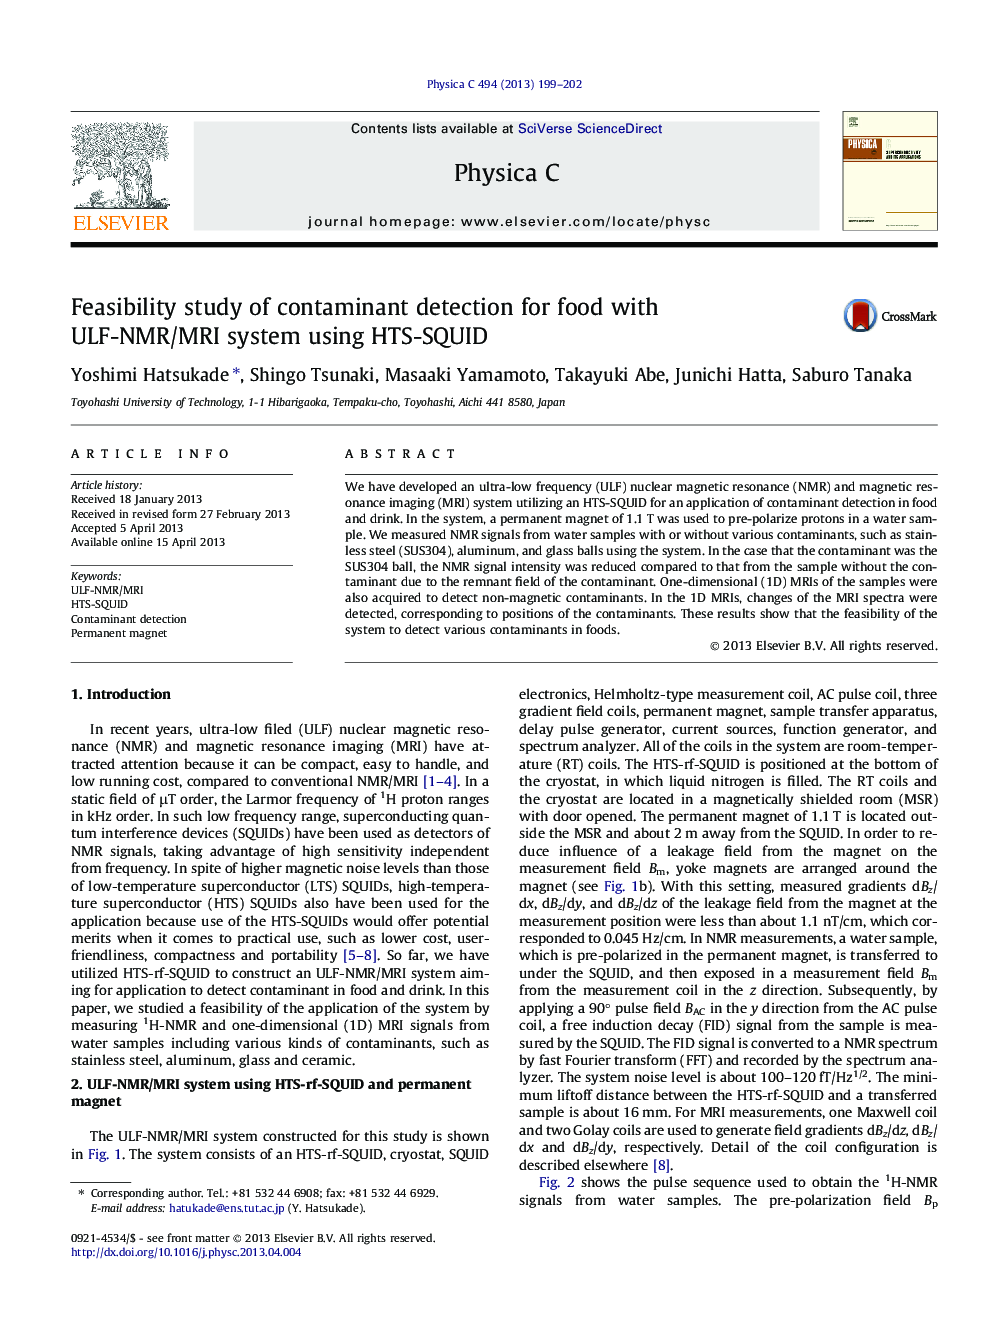 Feasibility study of contaminant detection for food with ULF-NMR/MRI system using HTS-SQUID